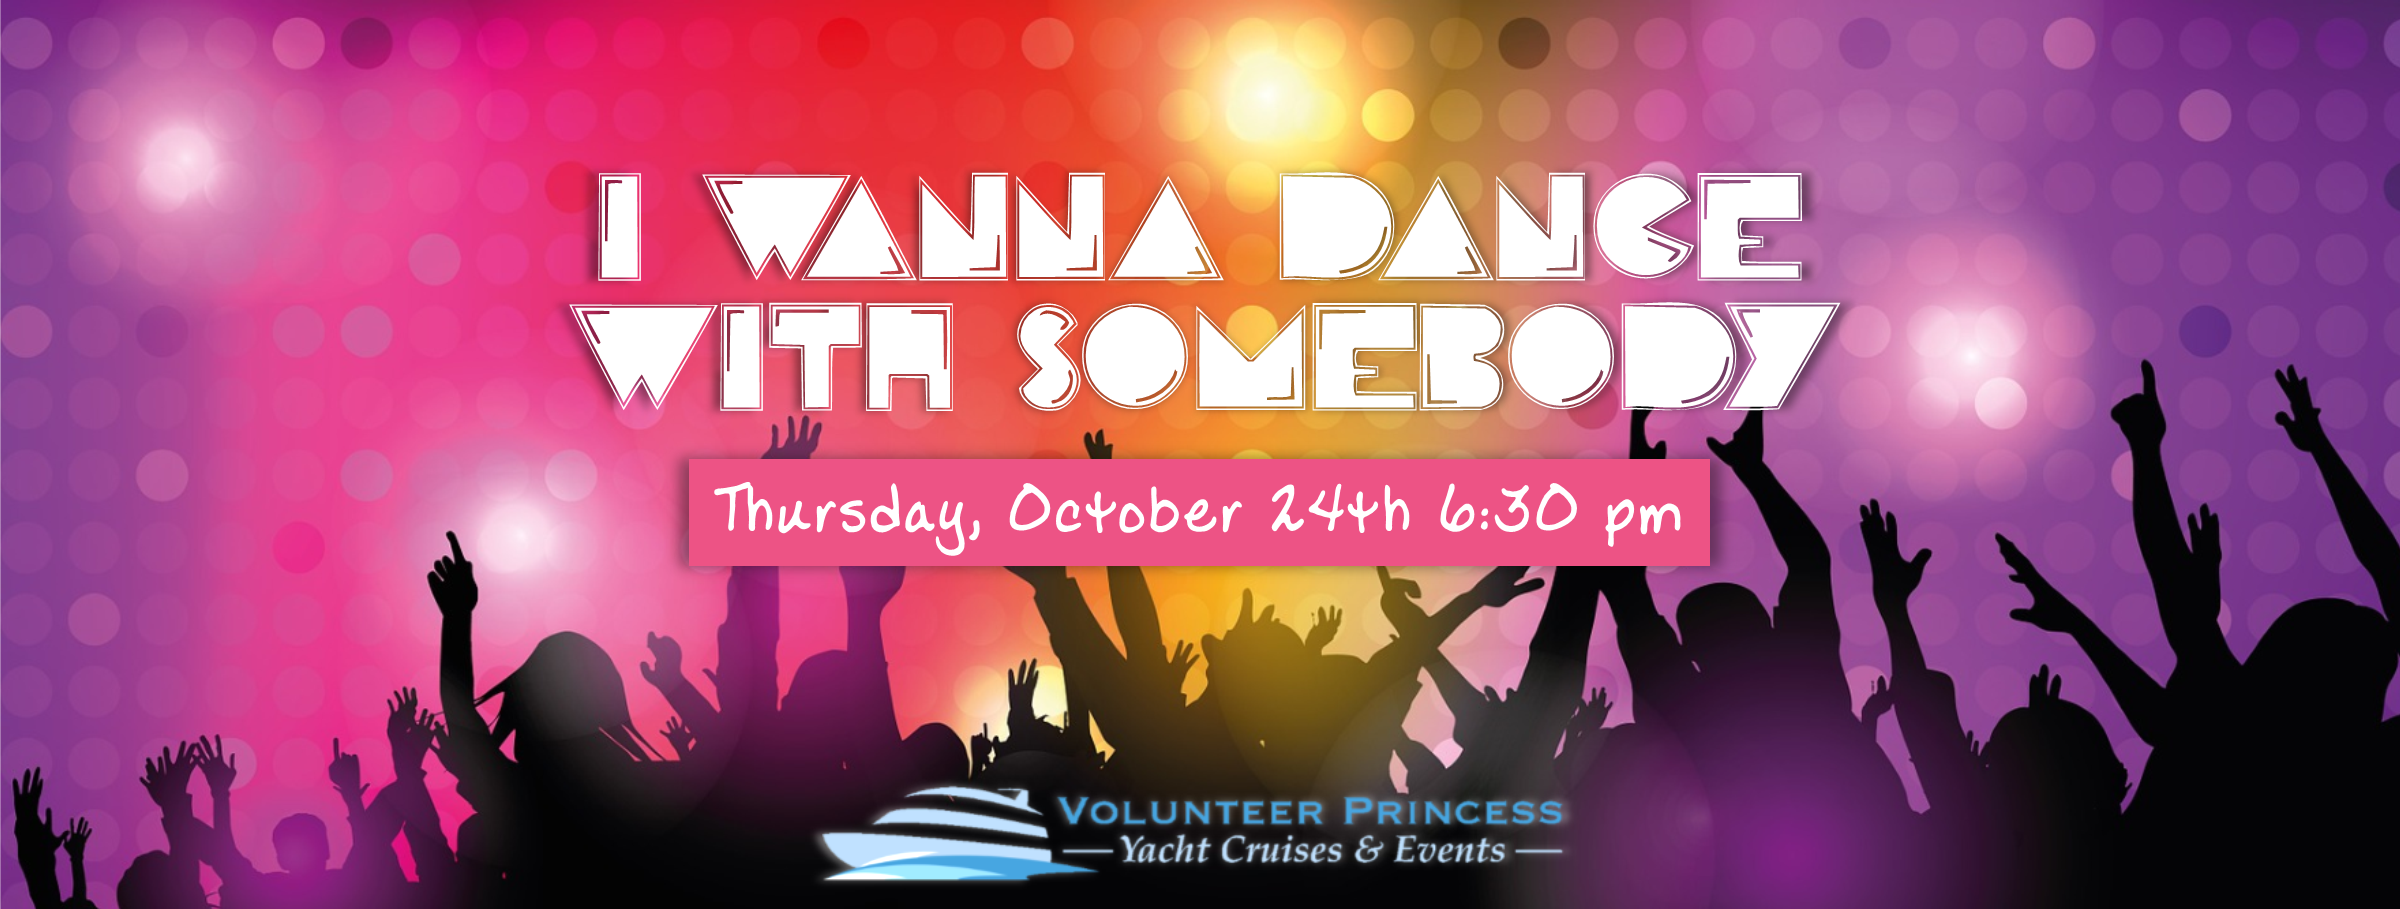 Knoxville Moms :: I Wanna Dance with Somebody